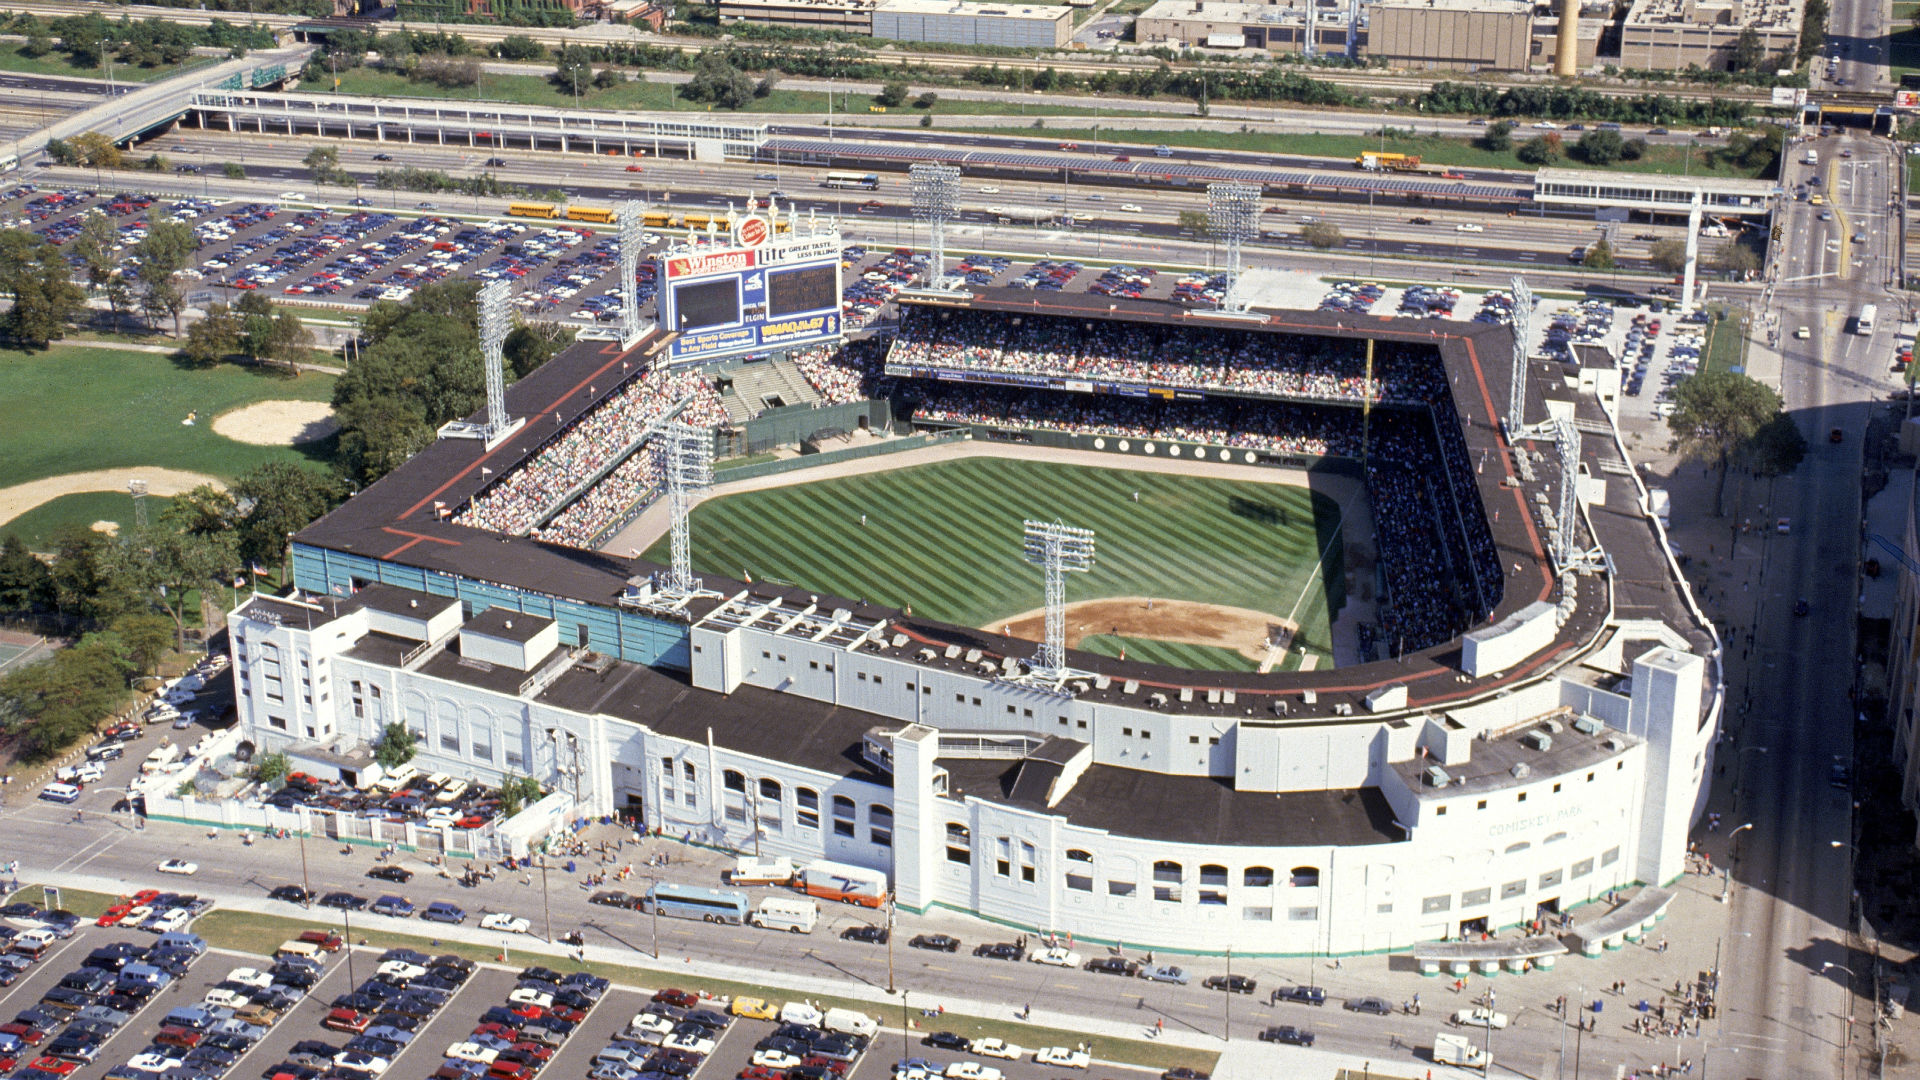 Last Game Played at Comiskey Park 